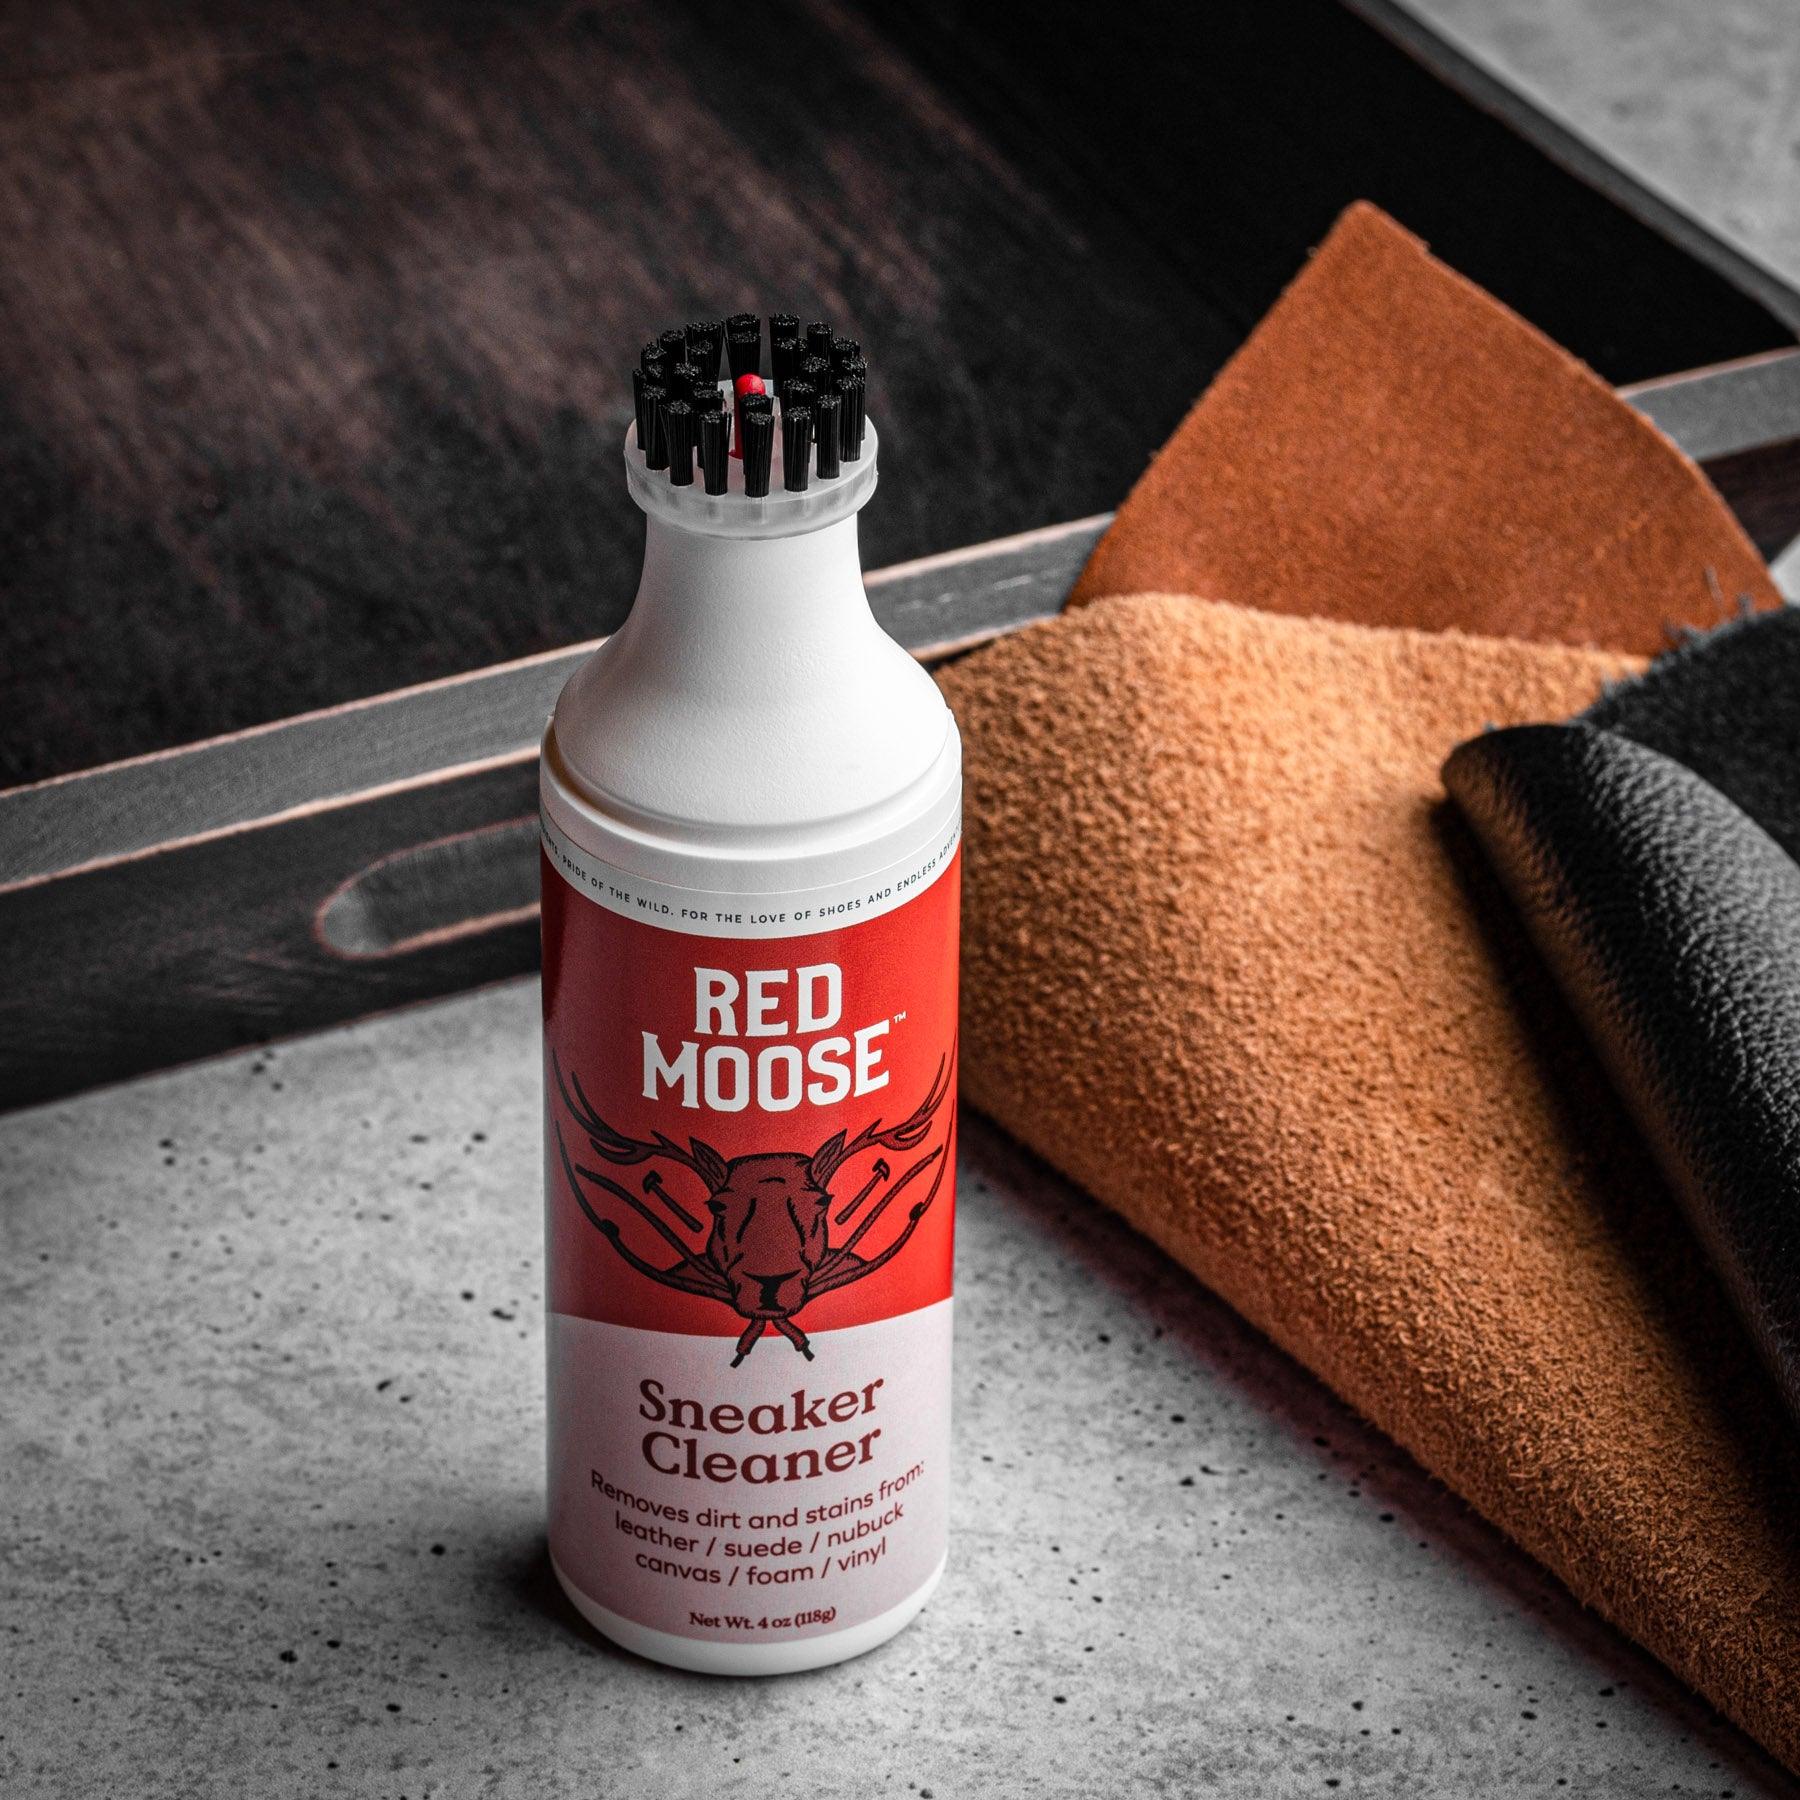  RED MOOSE Sneaker Whitener - Shoe Whitener for Leather, Canvas,  Foam, Rubber : Clothing, Shoes & Jewelry